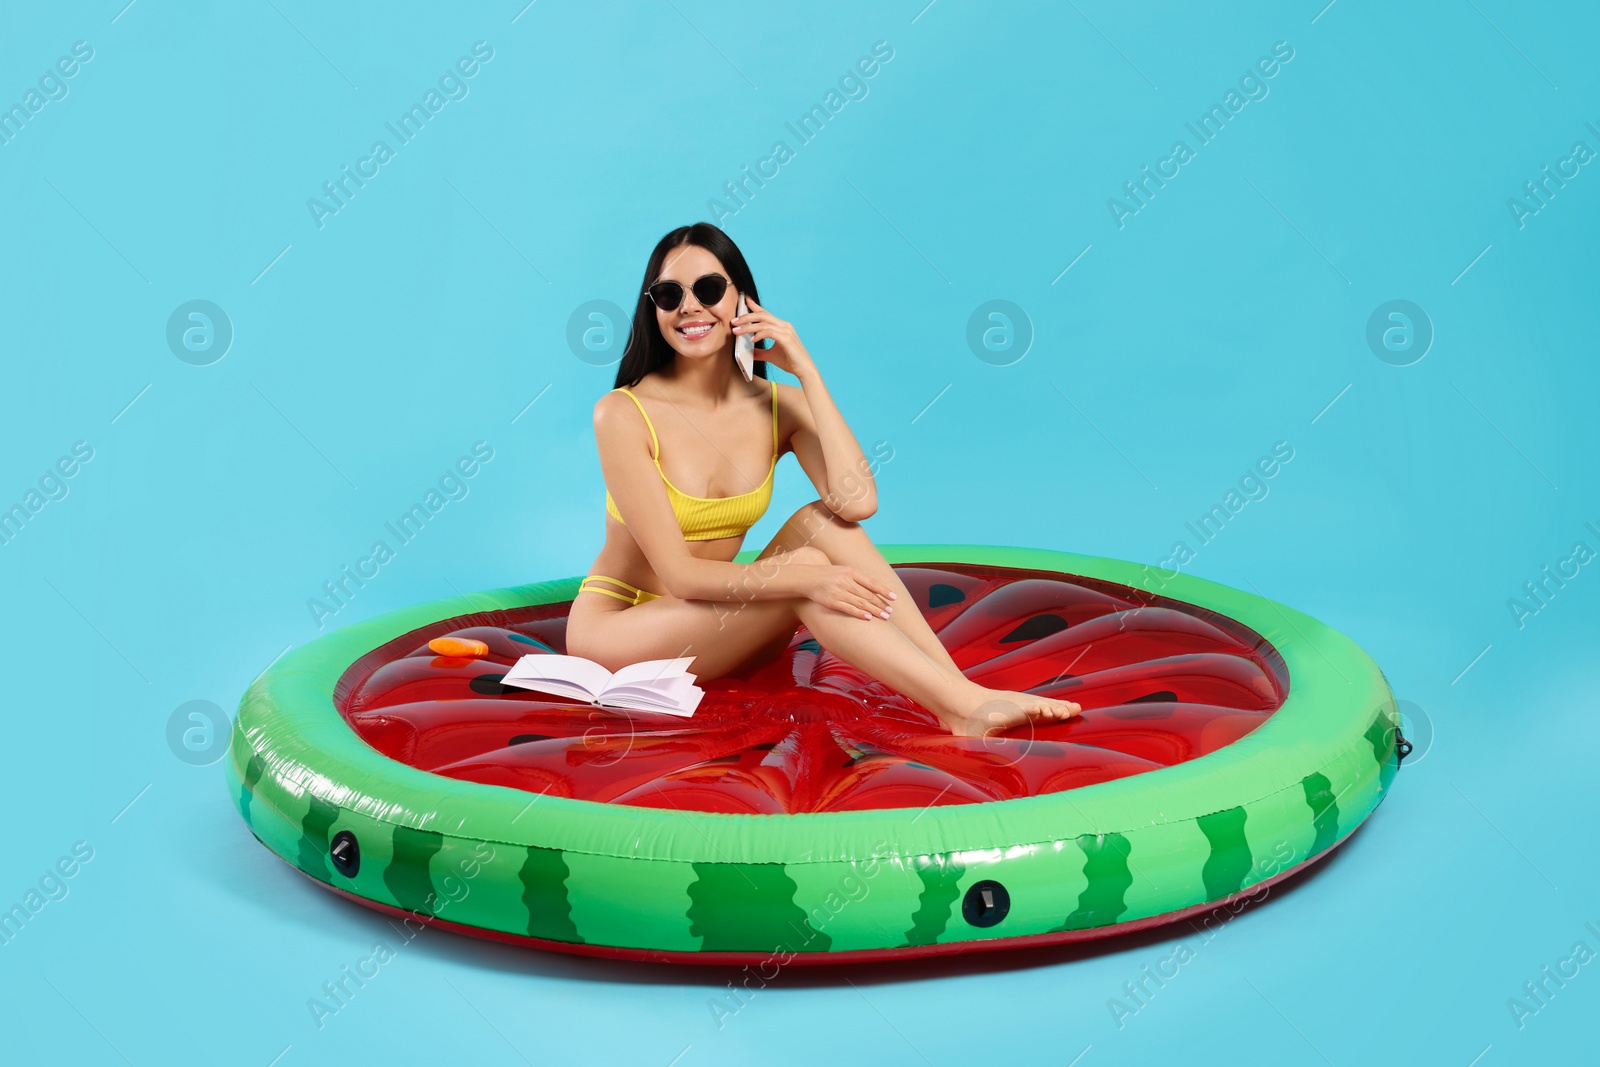 Photo of Young woman in stylish sunglasses on inflatable mattress against light blue background